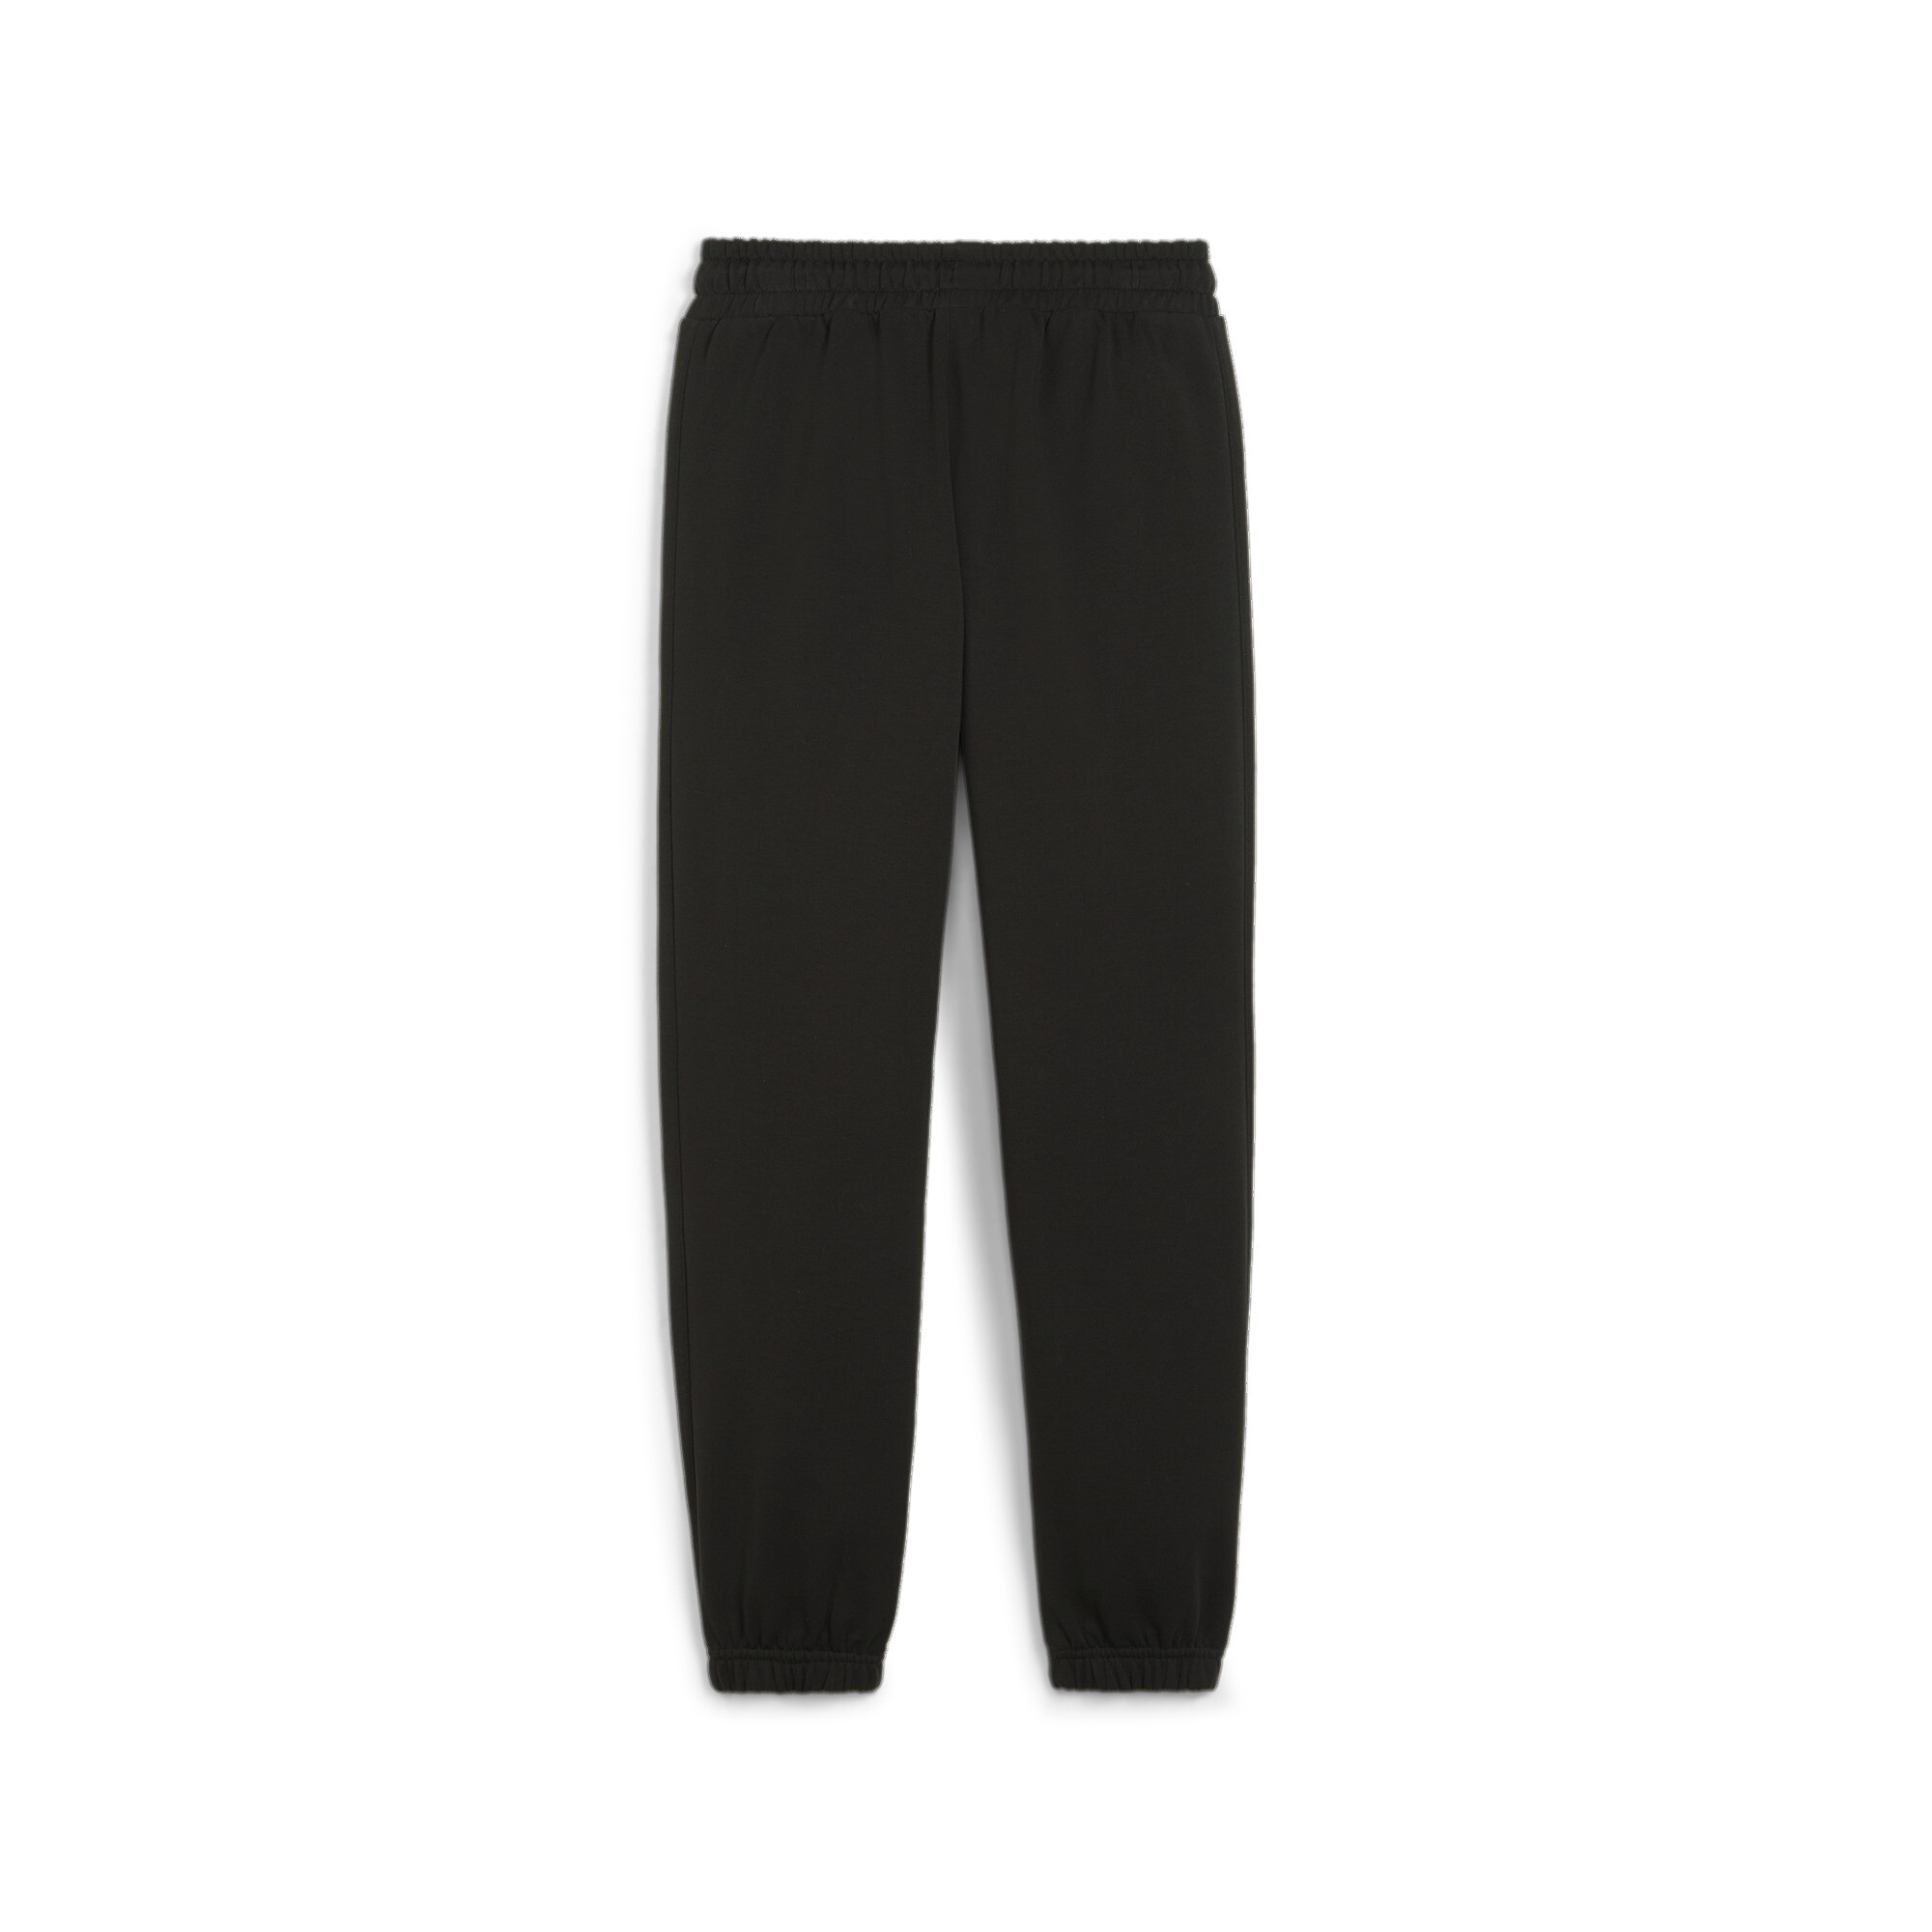 PUMA FOR THE FANBASE Sweatpants In Black, Size 15-16 Youth